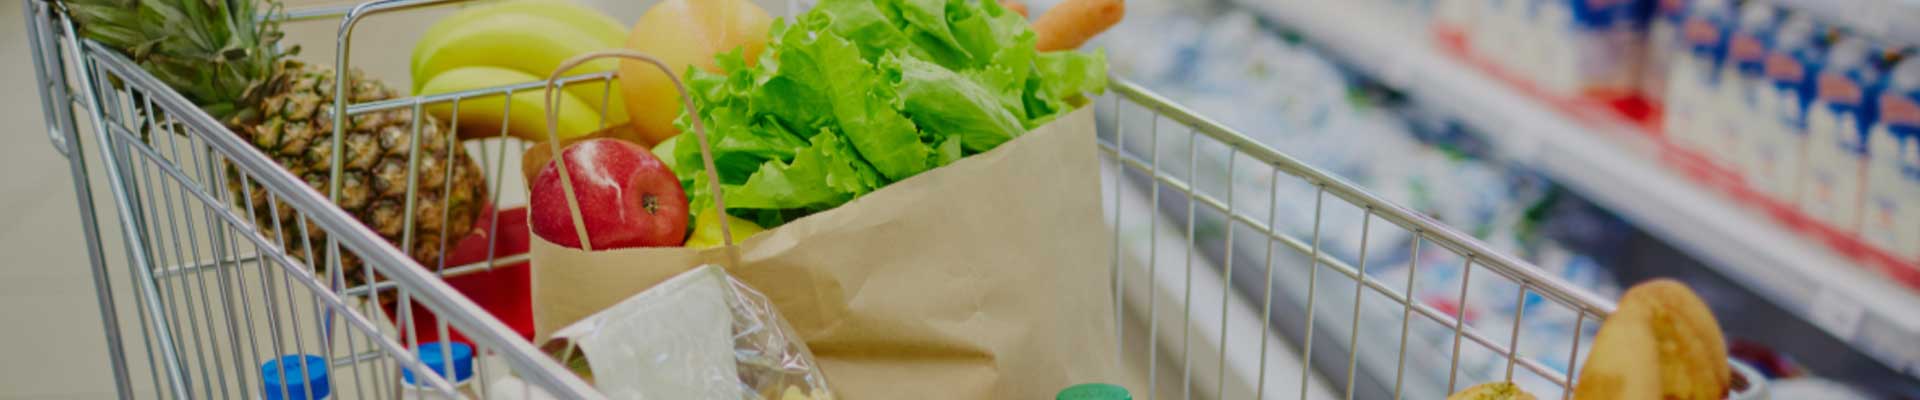 Biodegradable Food Packaging in Delivery Market